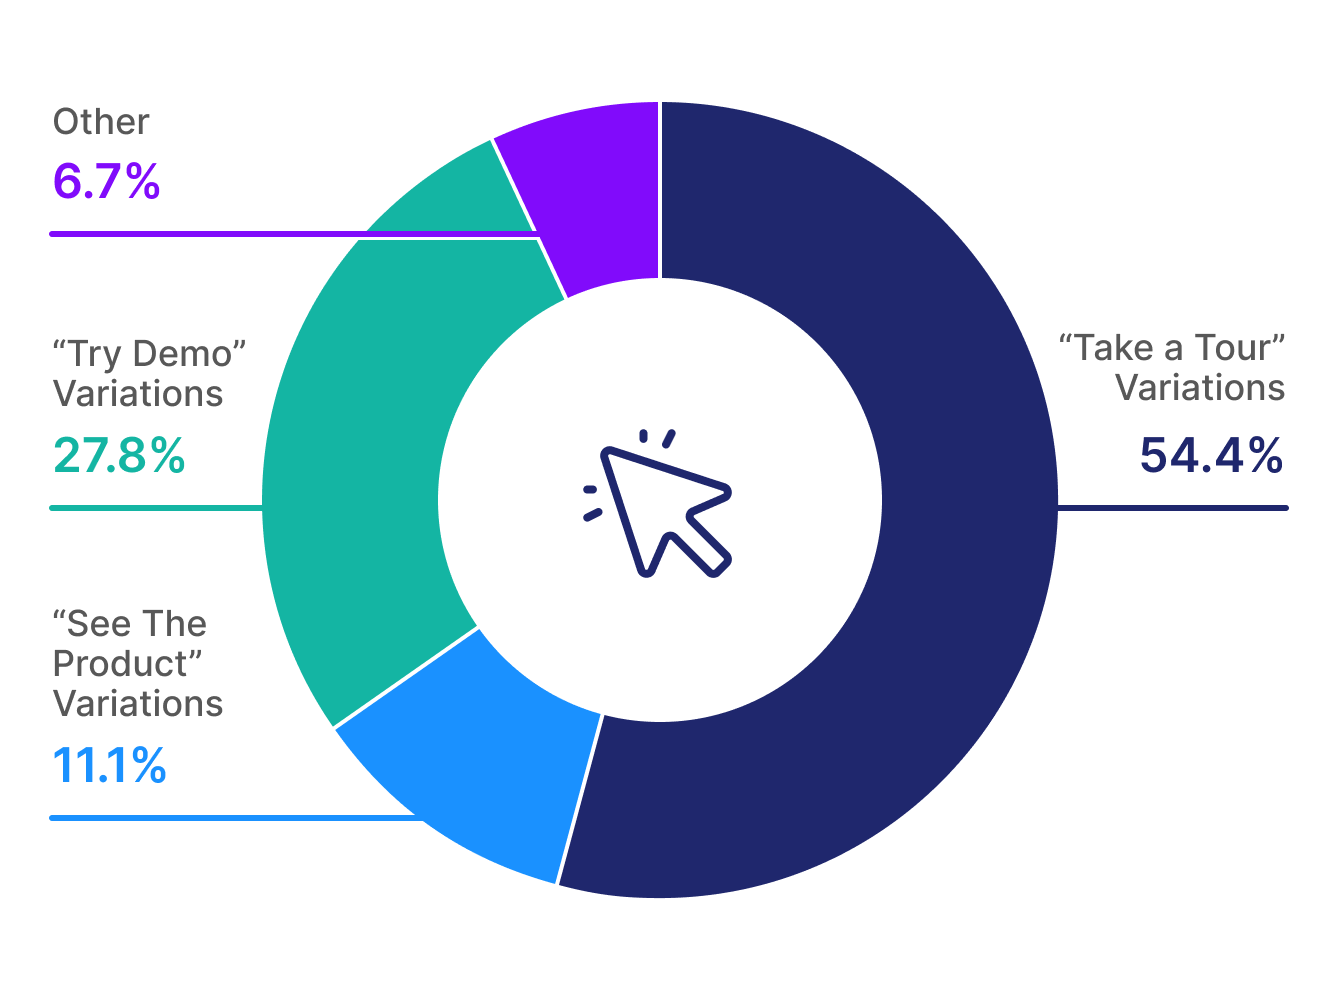 Breakdown of website CTA types for the top 1% of demos